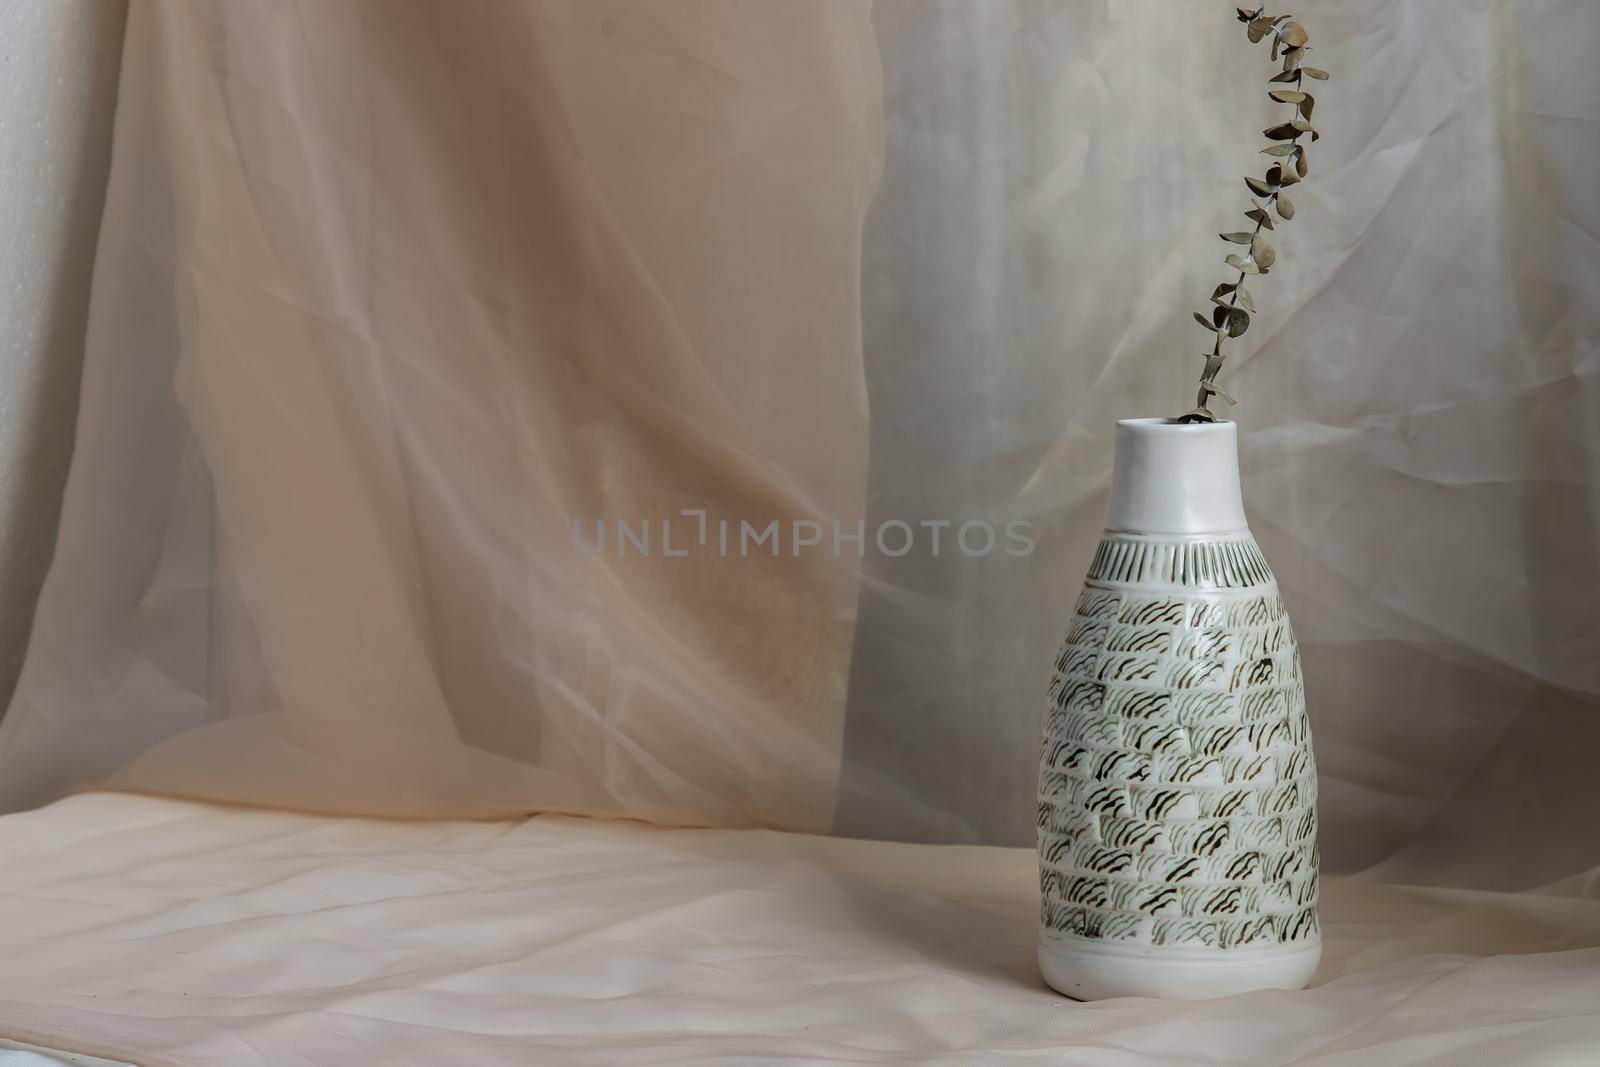 Dried flowers in White ceramic vase bottle shape on Blush textured table cloth. Home decor, Copy space, Selective focus.